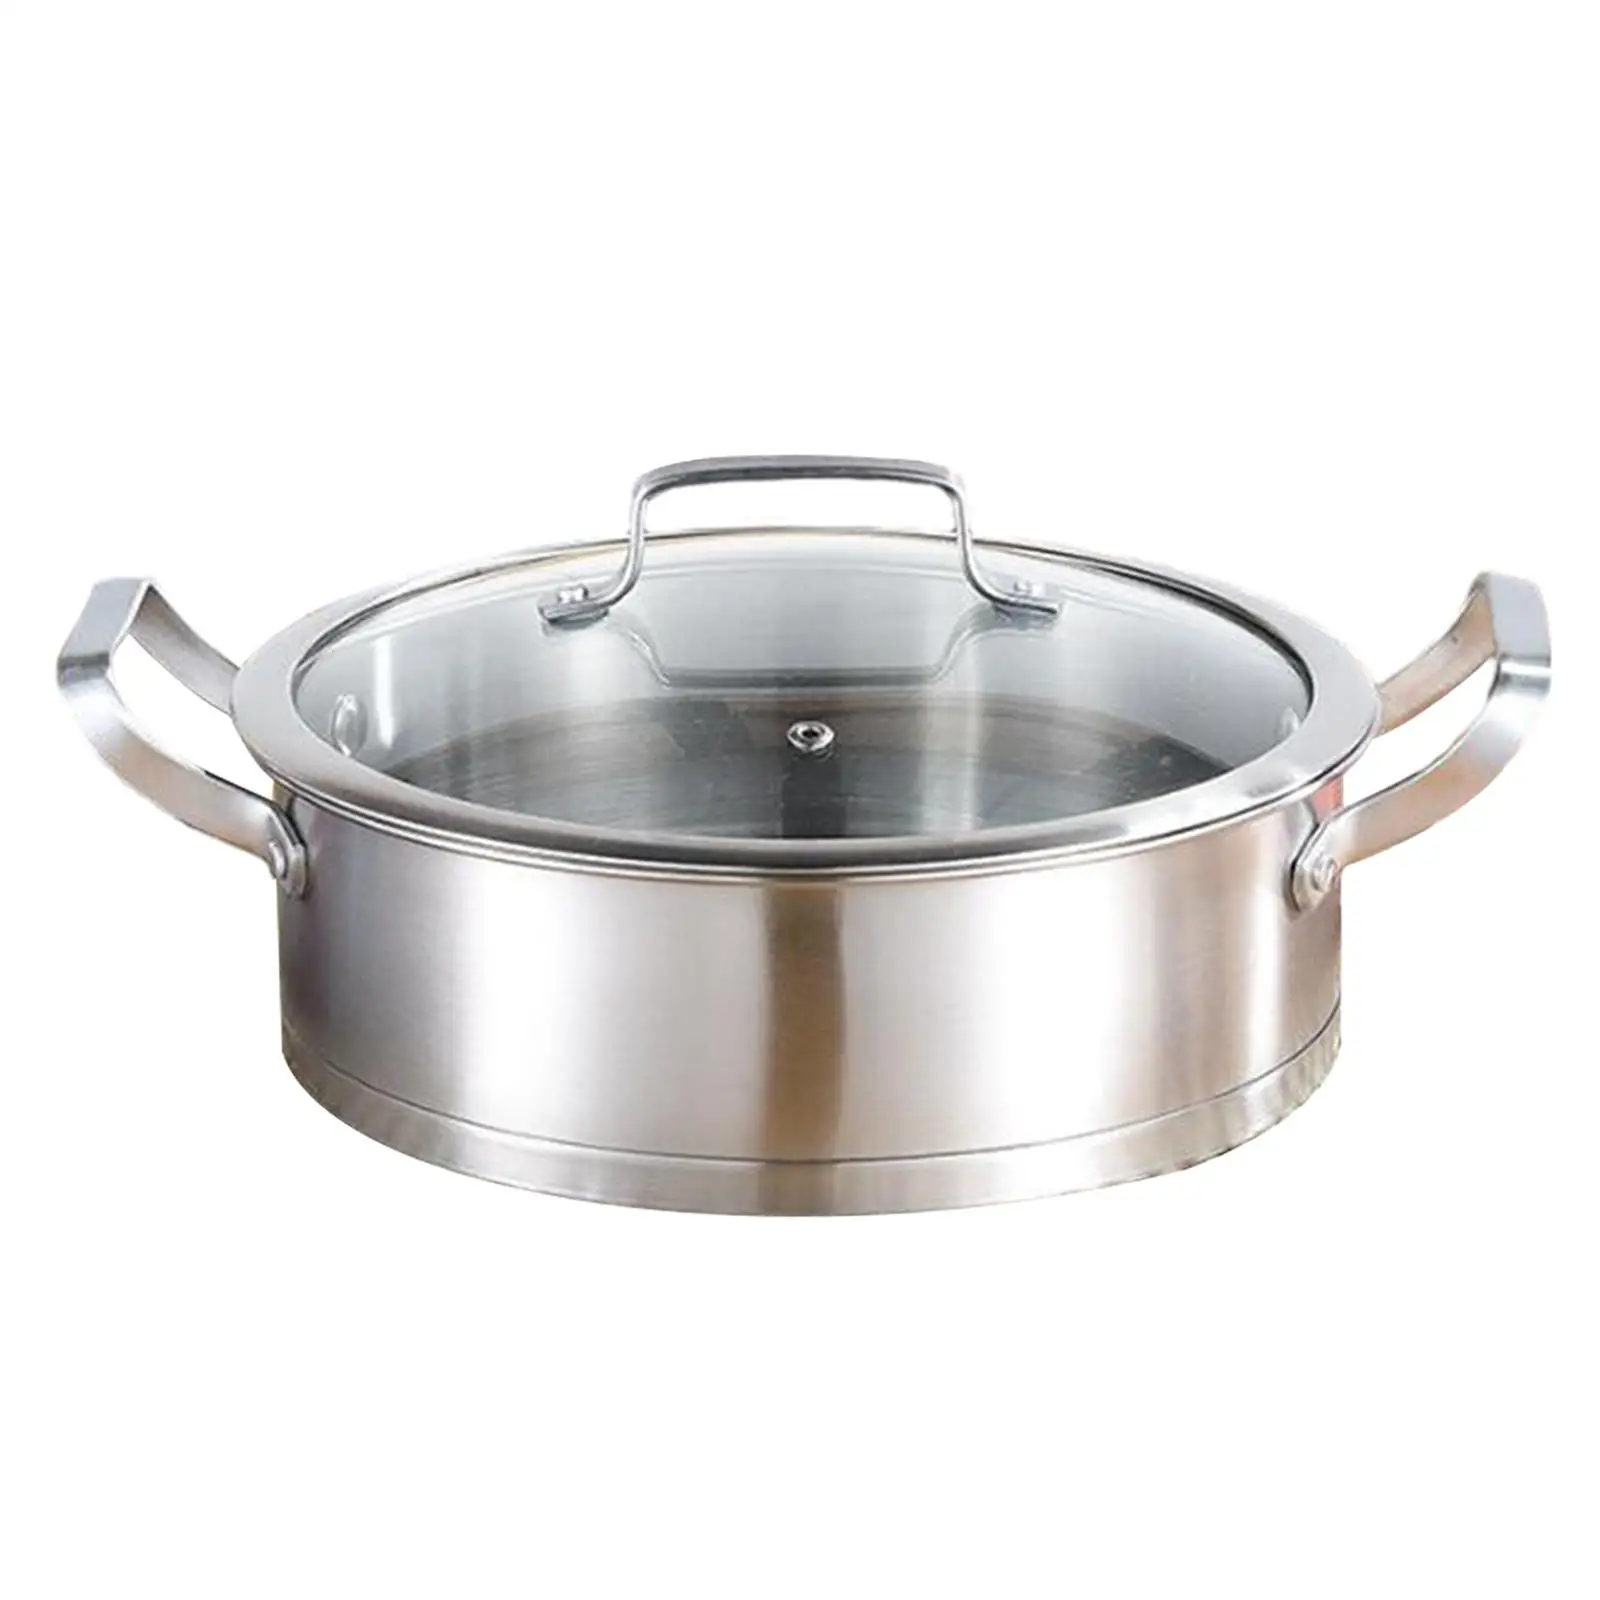 Kitchen Utensils Portable Frying Pan Stockpot with Lid Soup Pot Cooking Pot for Cafe Restaurant Kitchen Countertop Home Bar